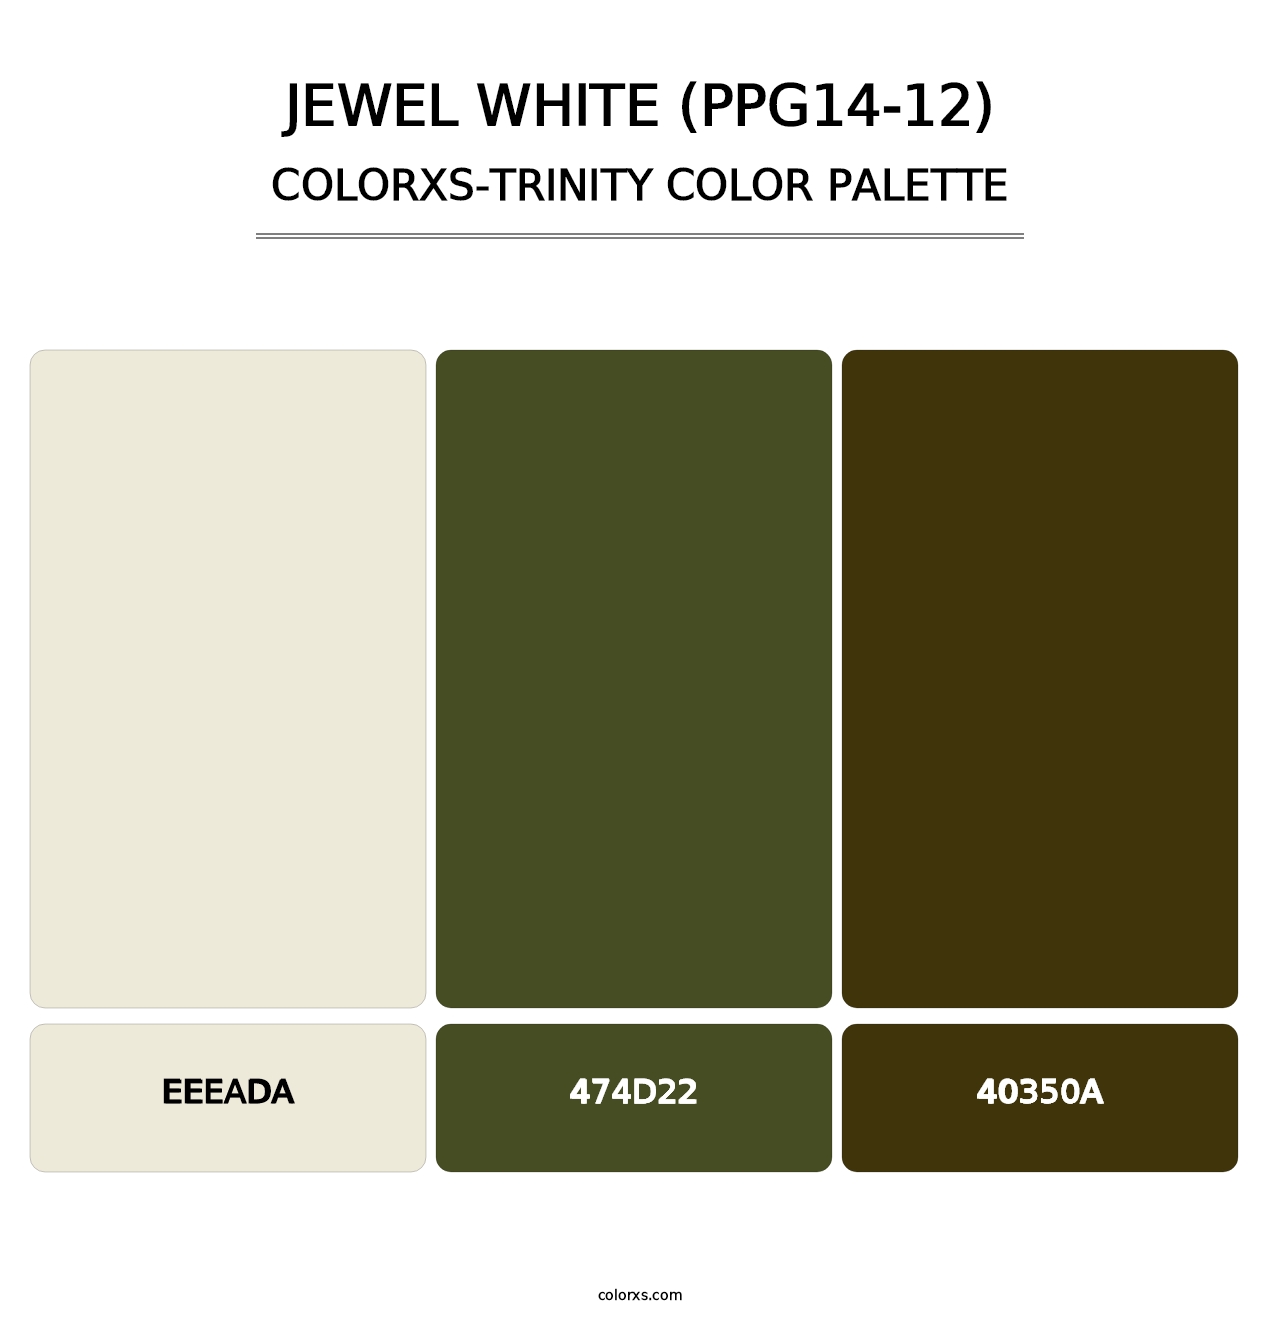 Jewel White (PPG14-12) - Colorxs Trinity Palette